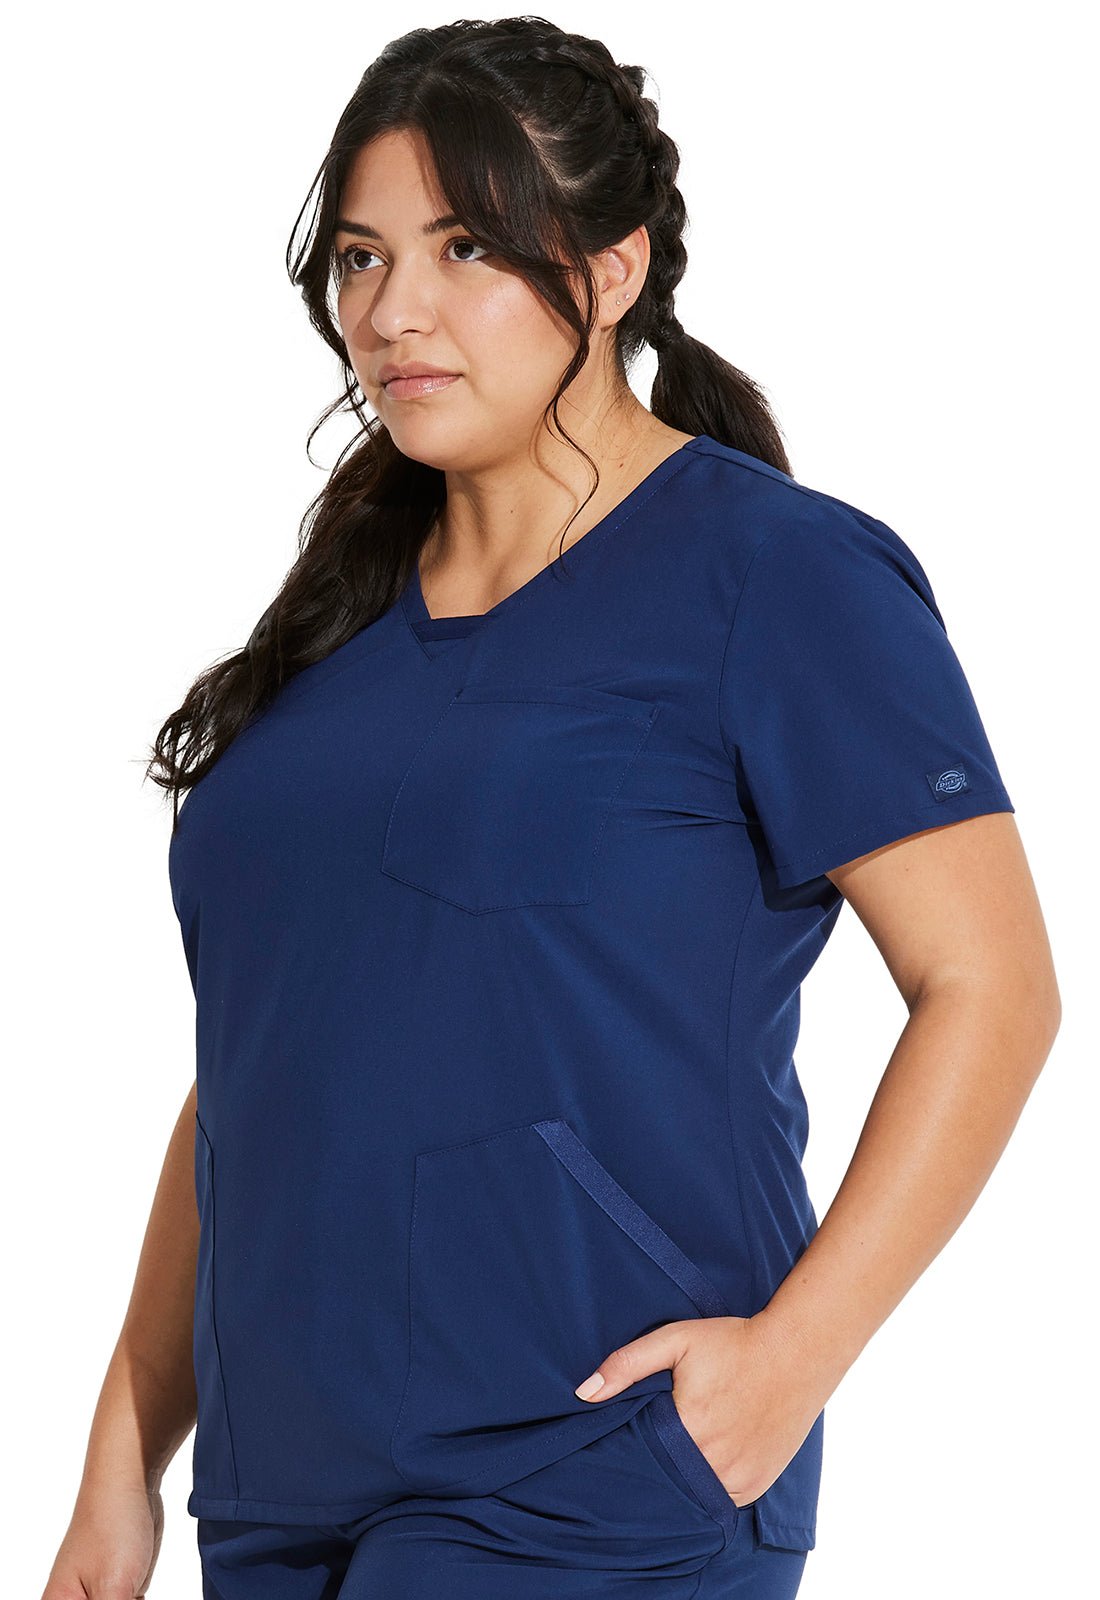 Dickies EDS Essentials V Neck Top DK641 in Black, Navy, Orchid Frost - Scrubs Select